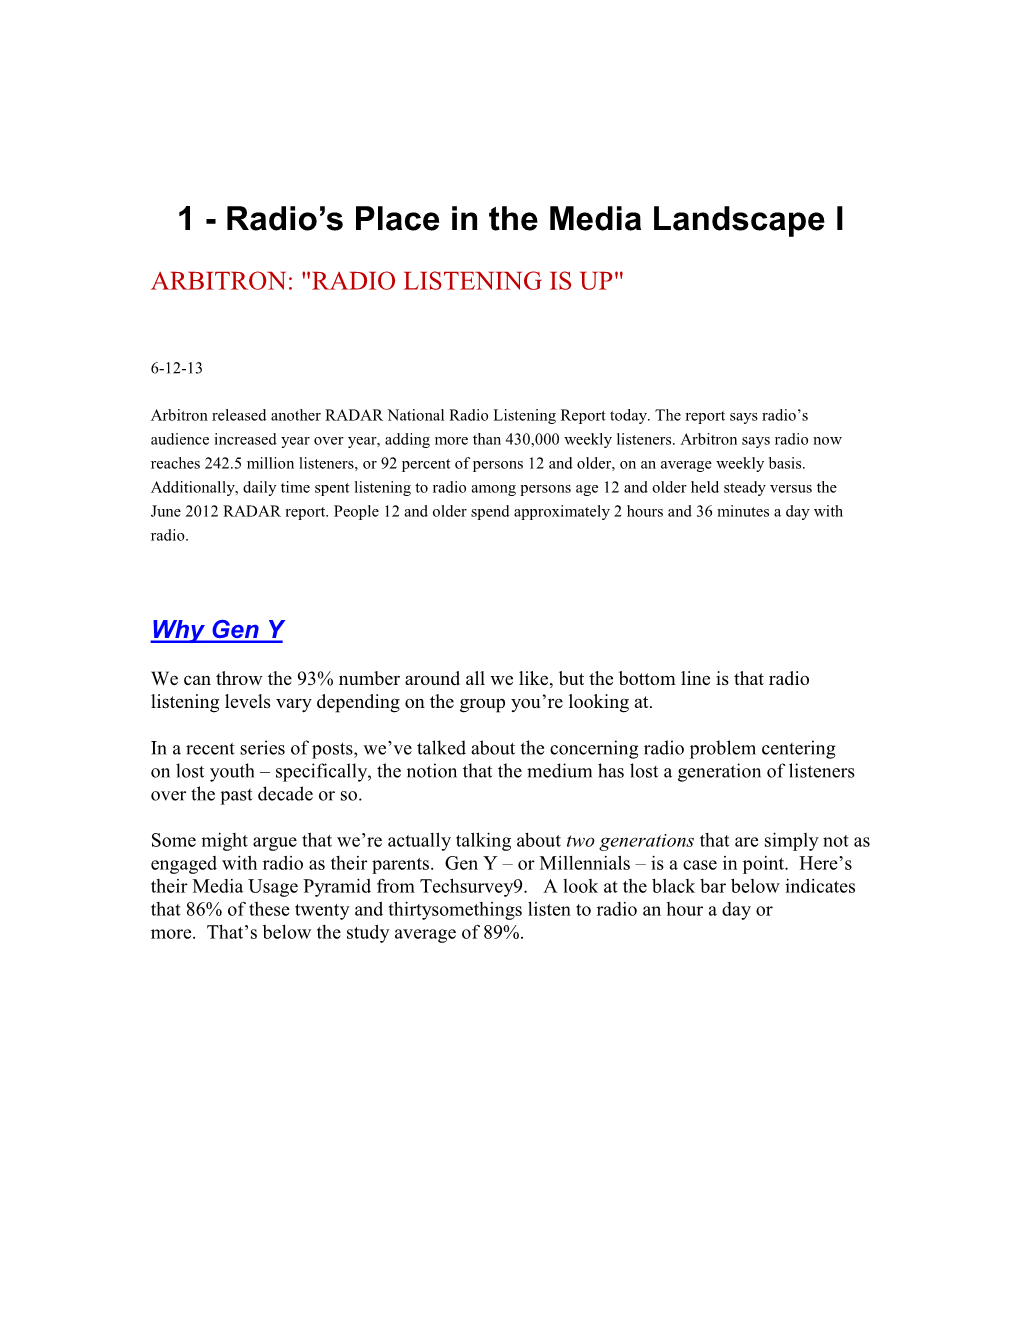 1 - Radio’S Place in the Media Landscape I